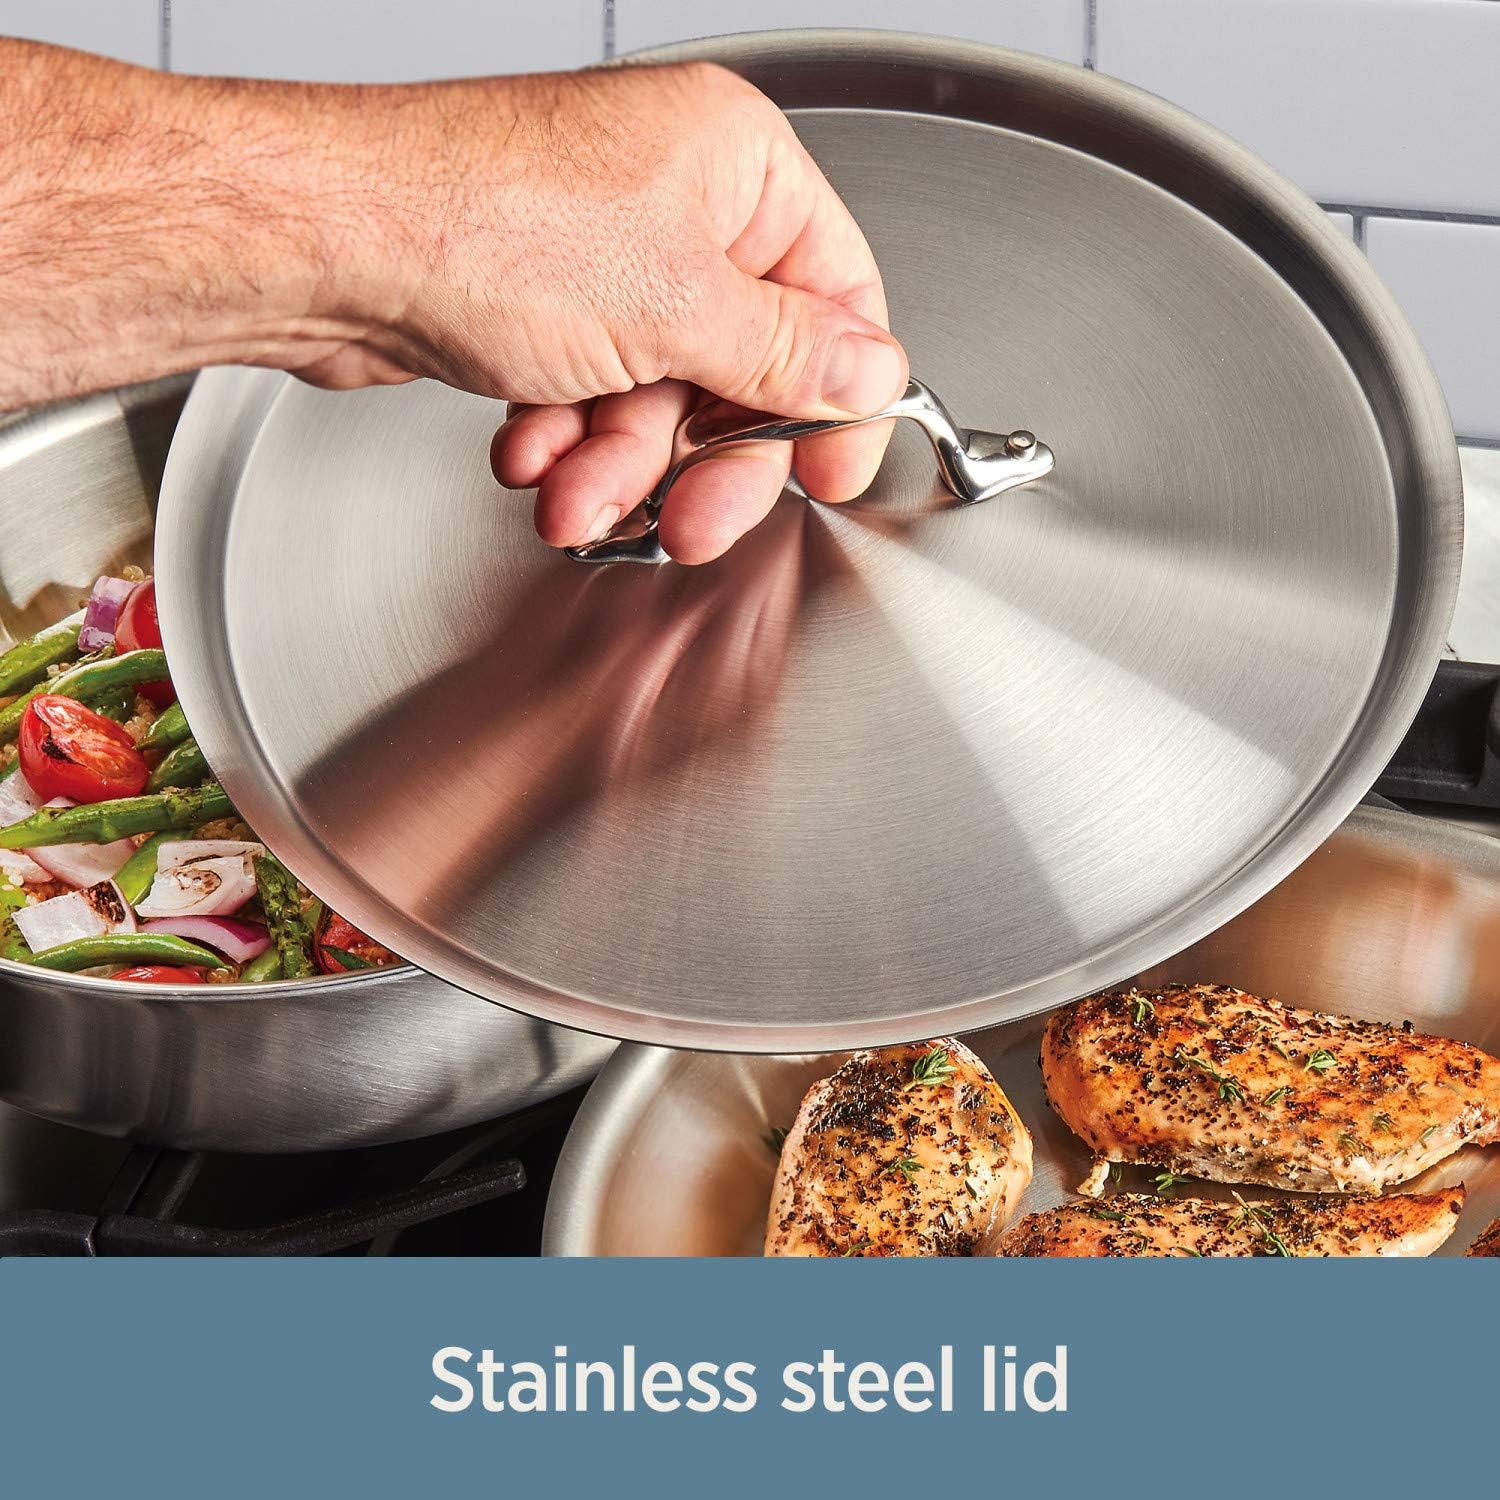 Oven Safe Stainless Steel Frying Pan - Induction Skillet For All